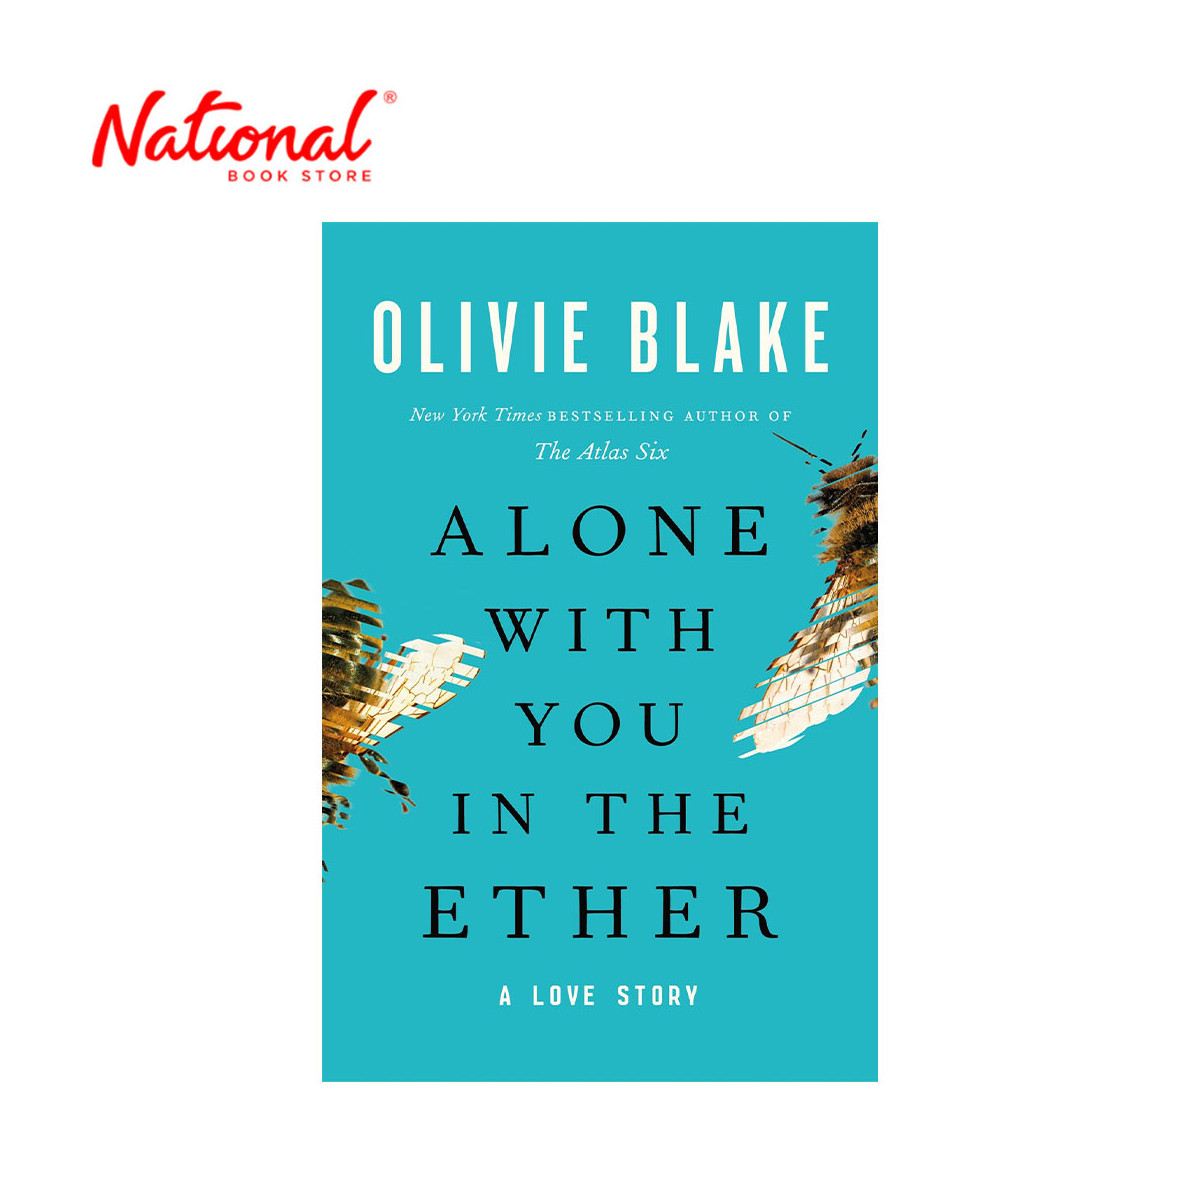 Alone With You In The Ether A Love Story by Olivieblake - Trade Paperback - Sci-Fi, Fantasy & Horror